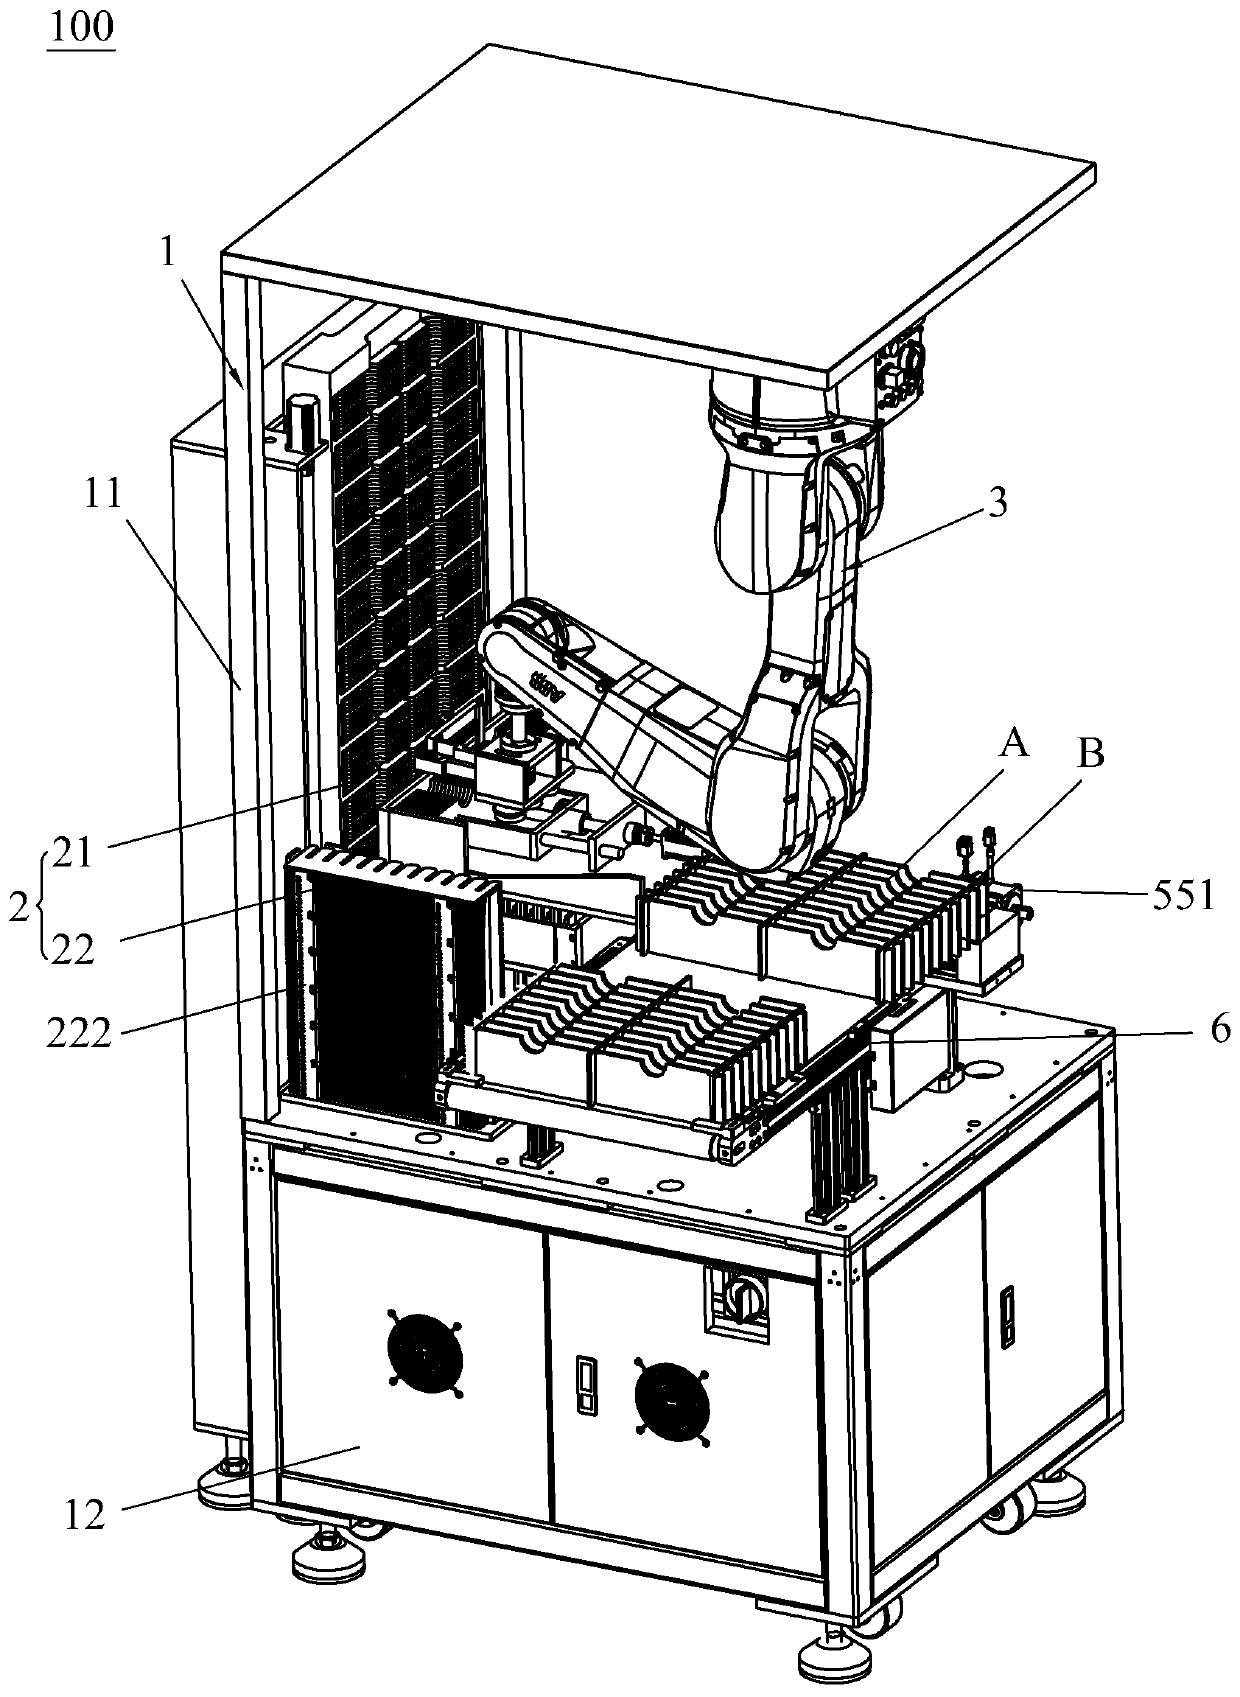 Partition plate assembling device